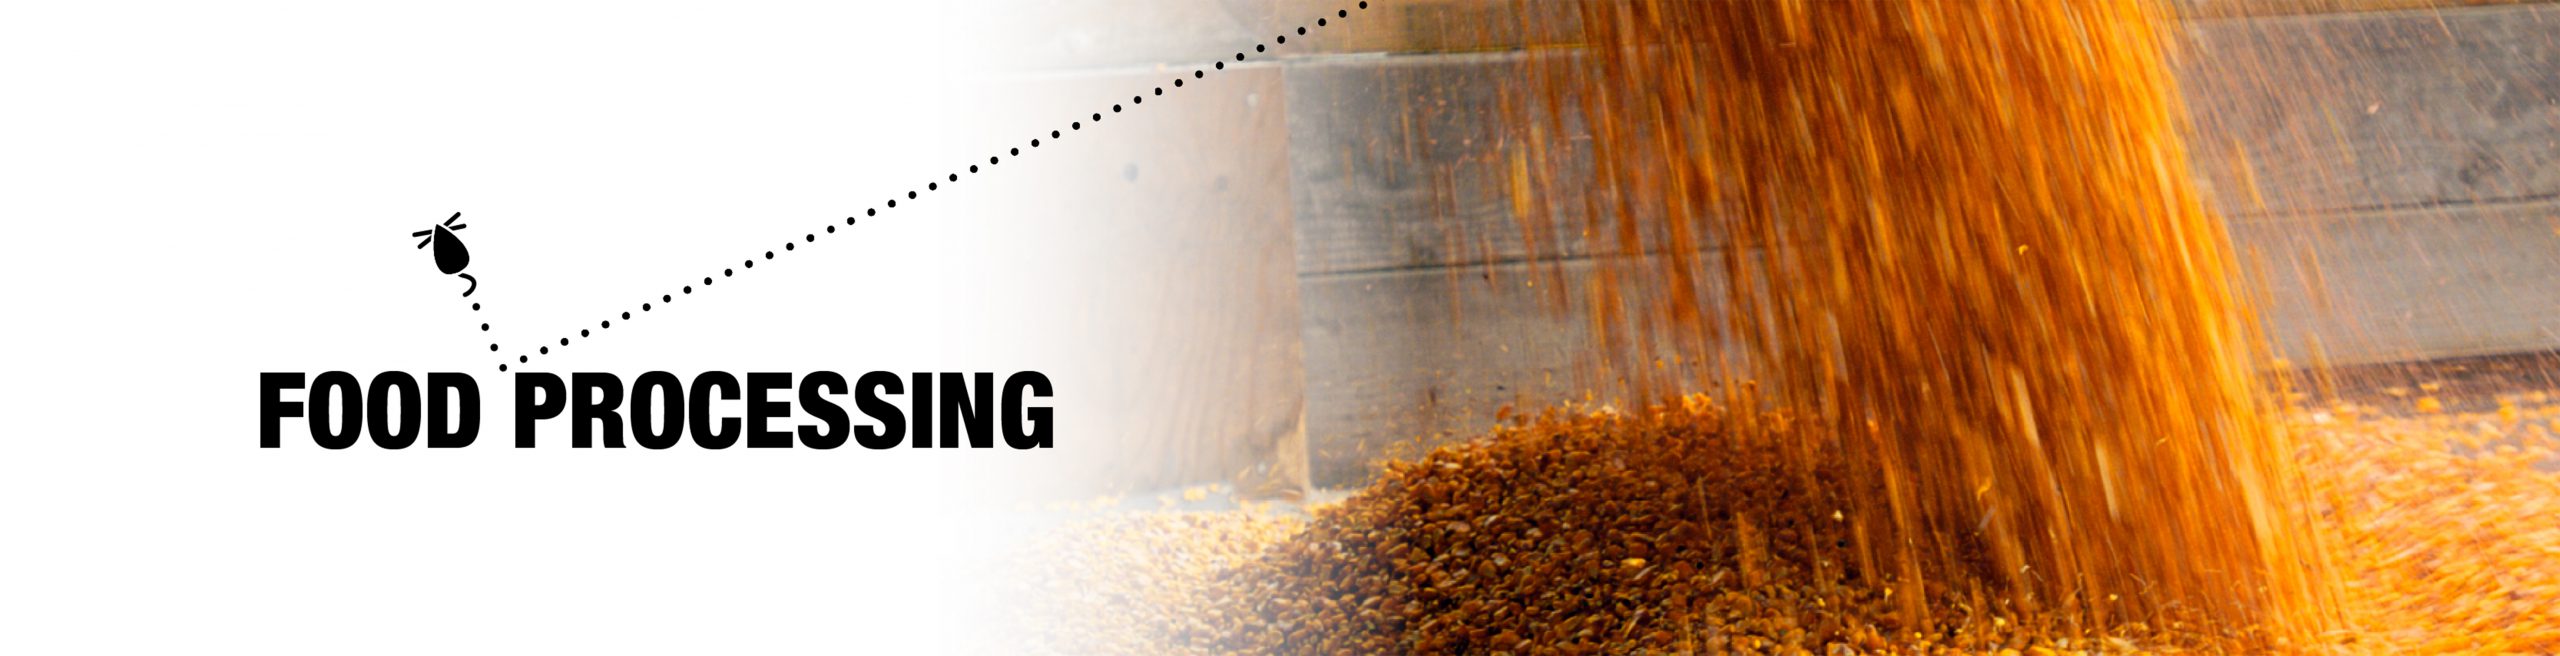 Food Processing header with image of grain